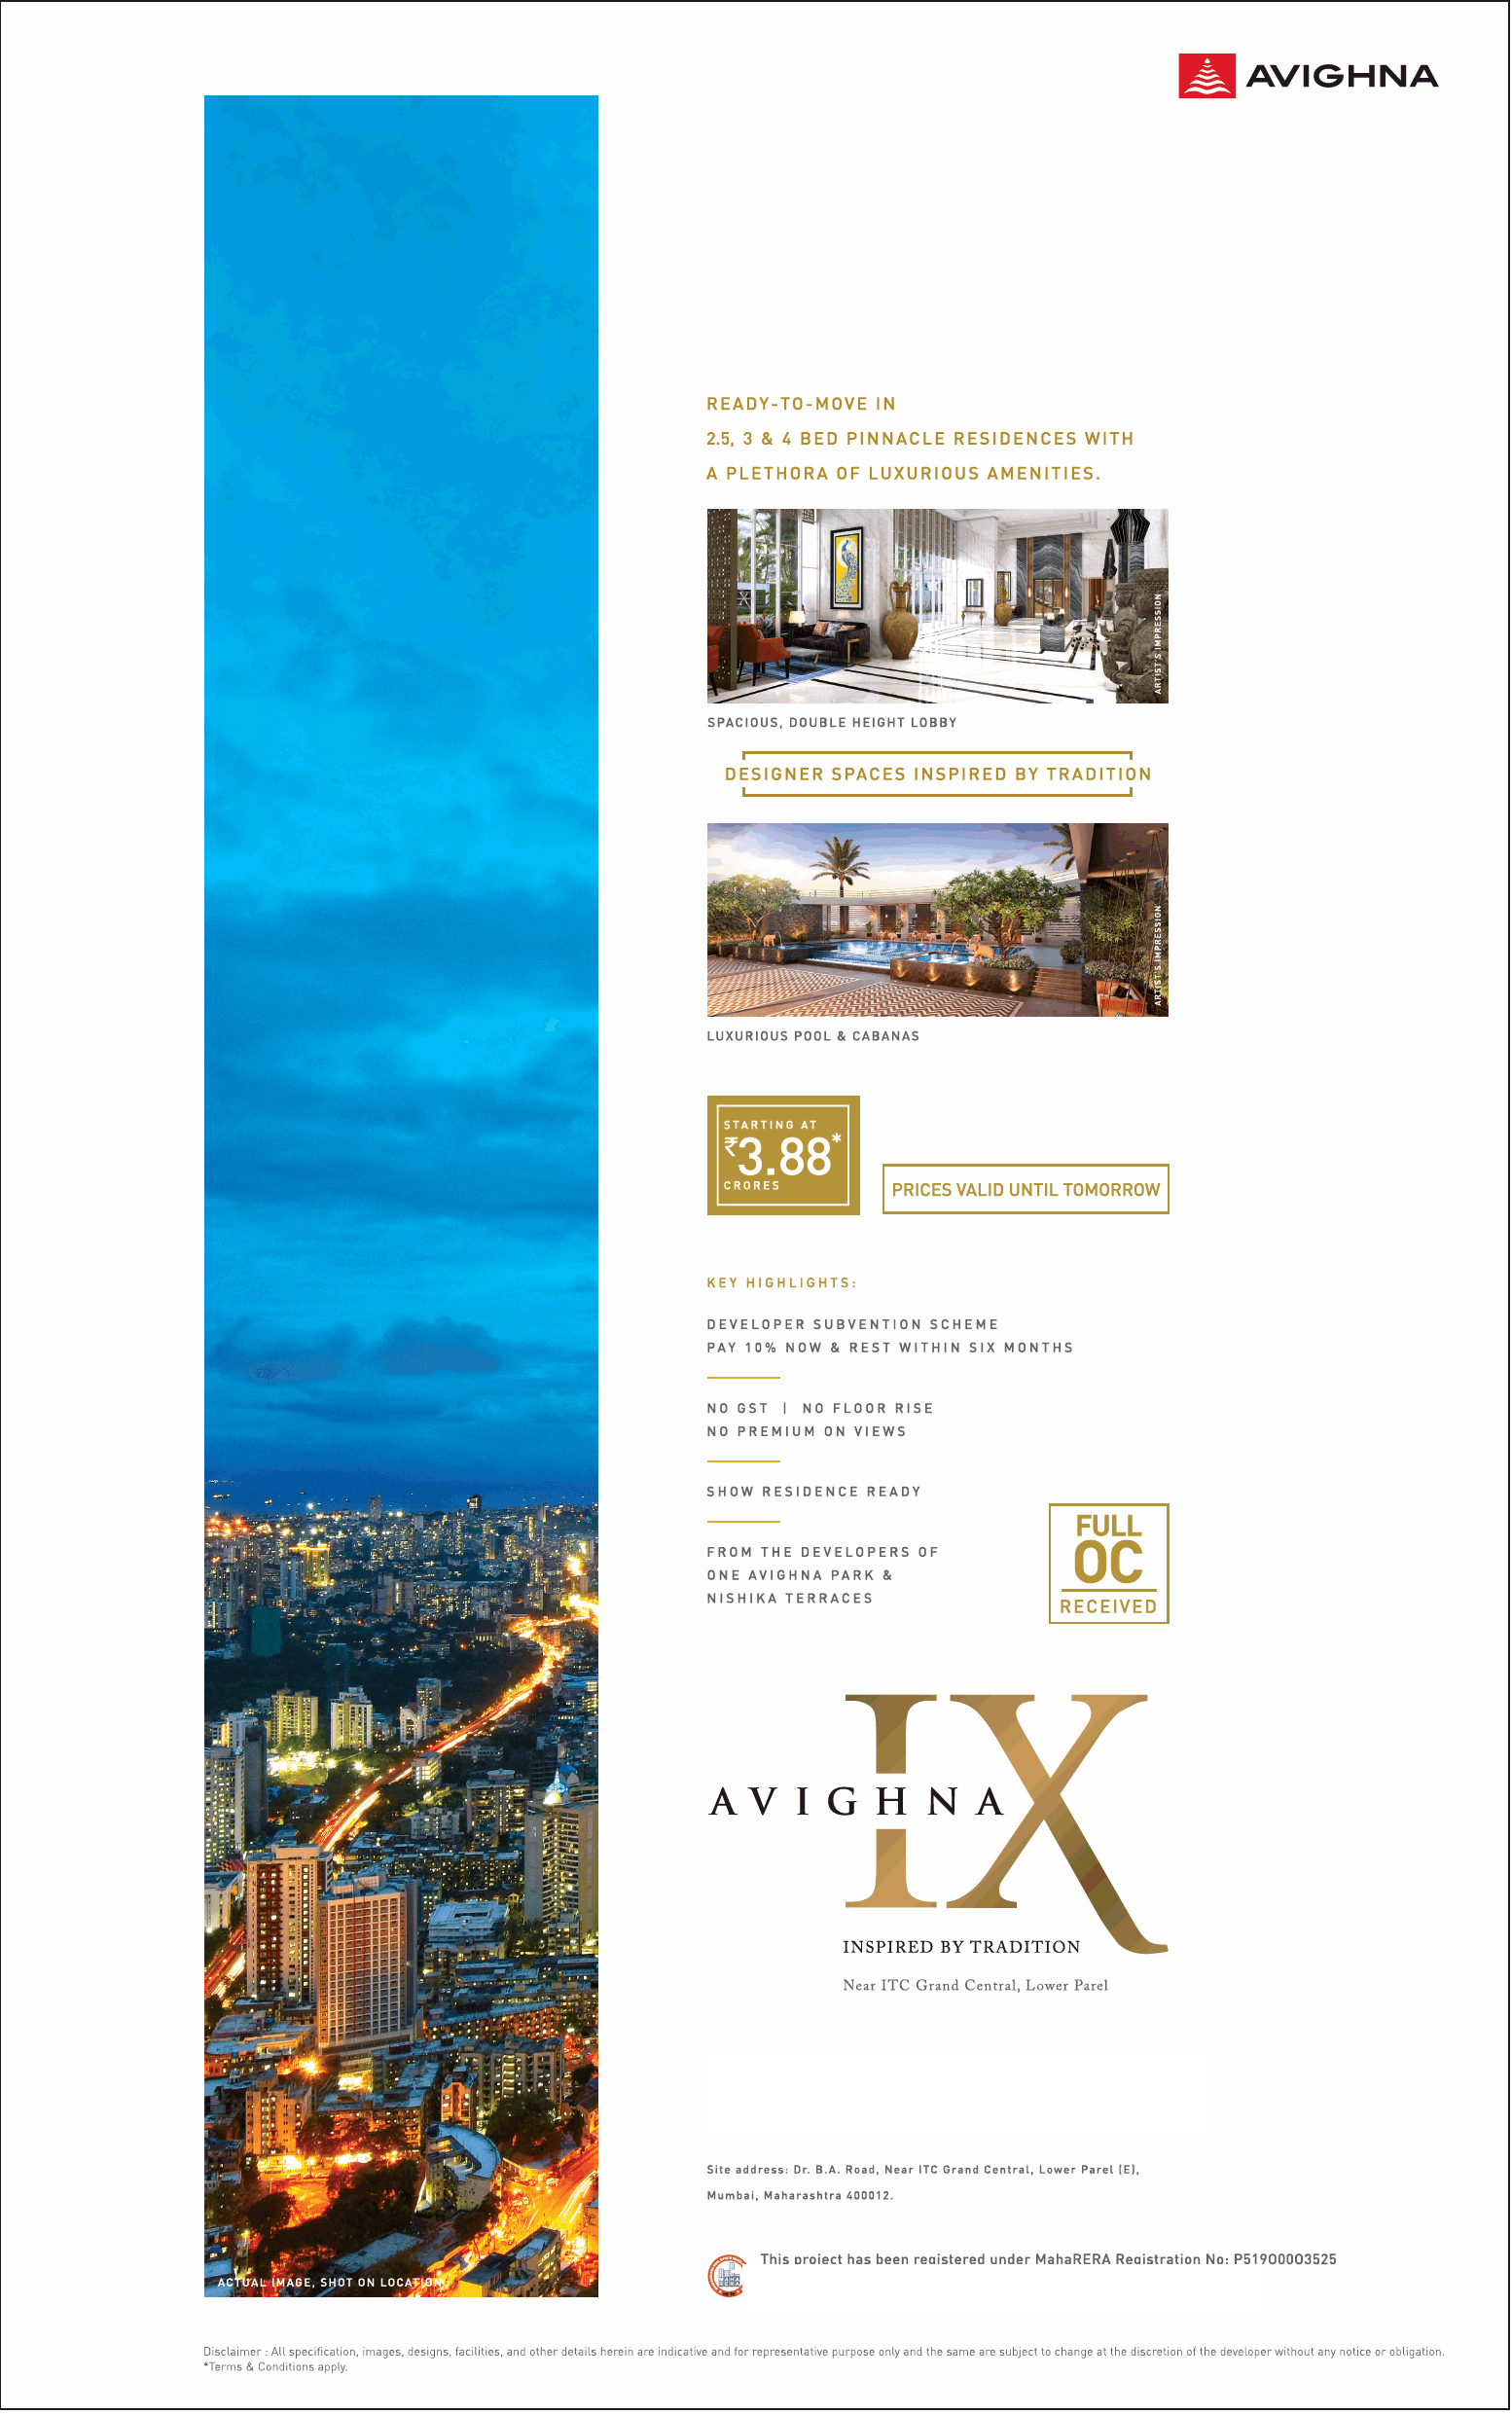 Pay 10% now and rest within six months at Avighna 9 near ITC, Lower Parel, Mumbai